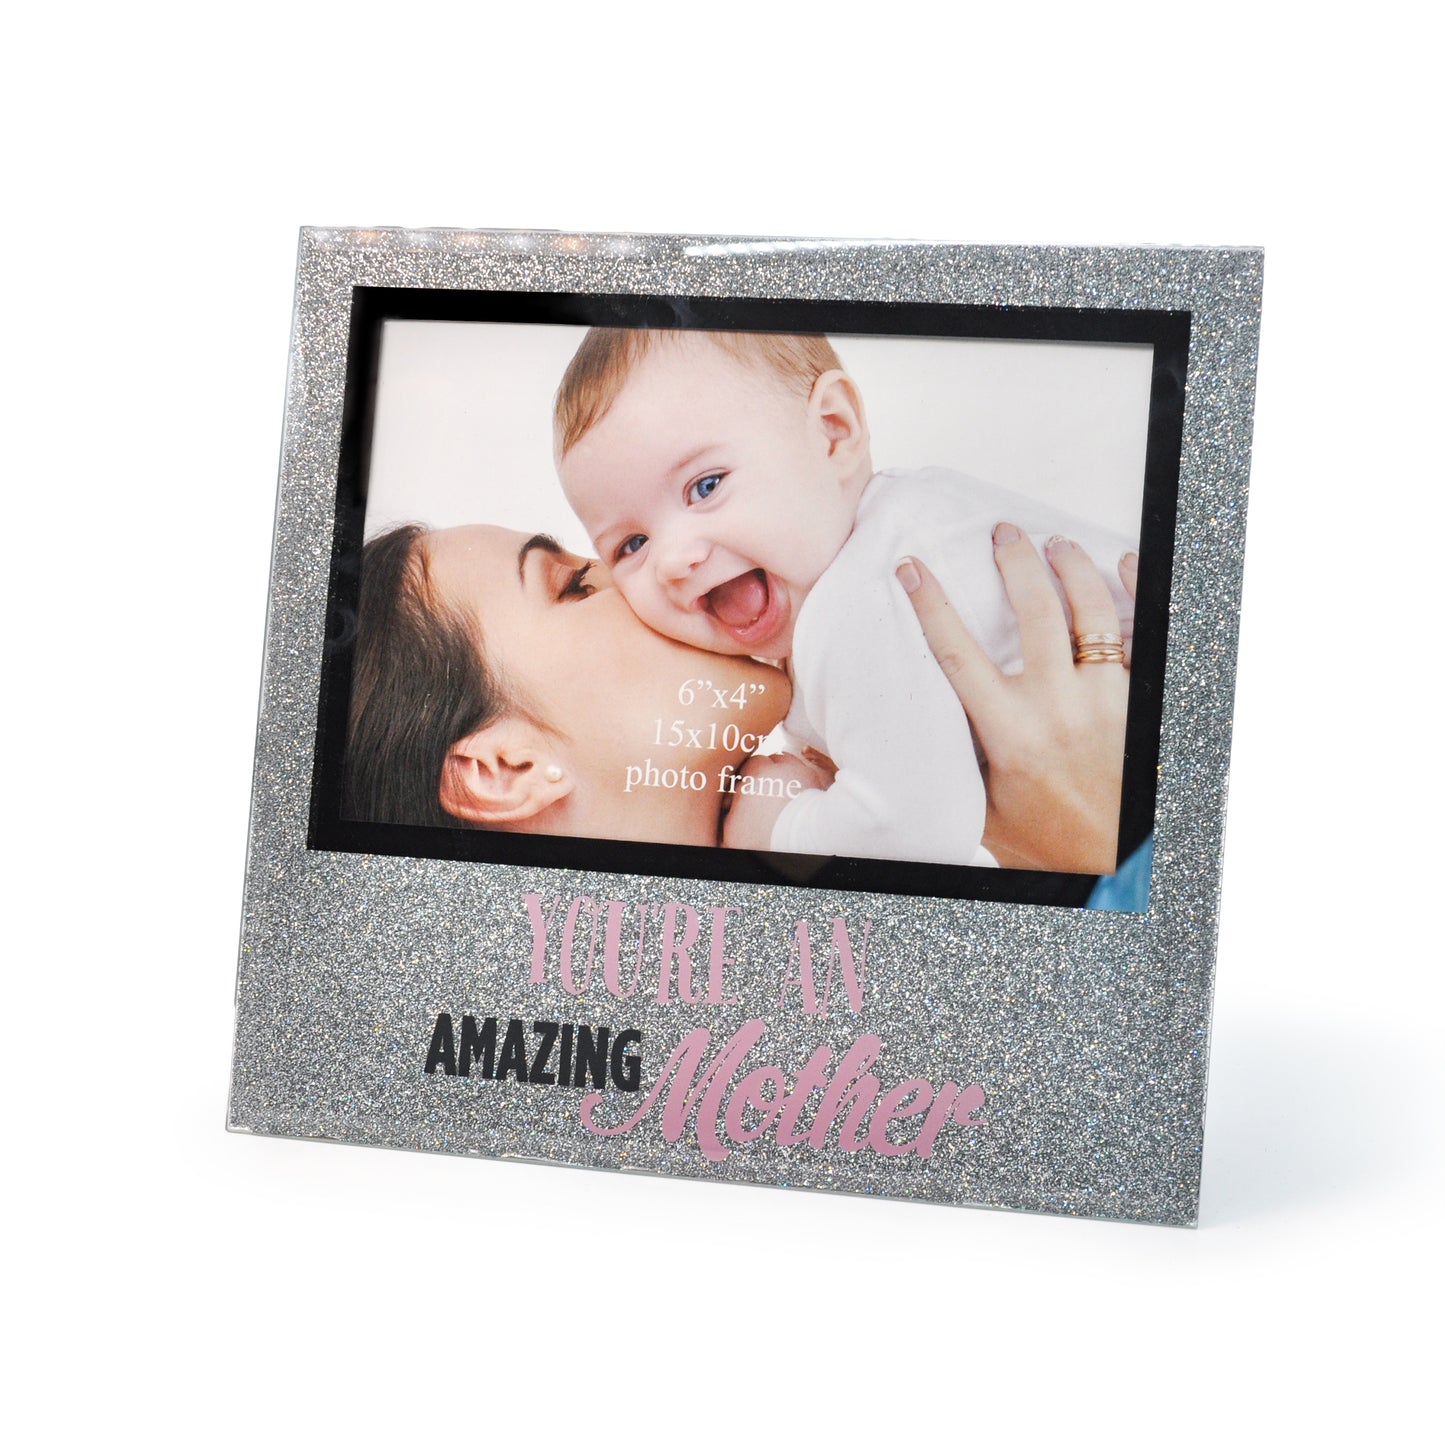 "Amazing Mother" Photo Frame by Crystal Castle